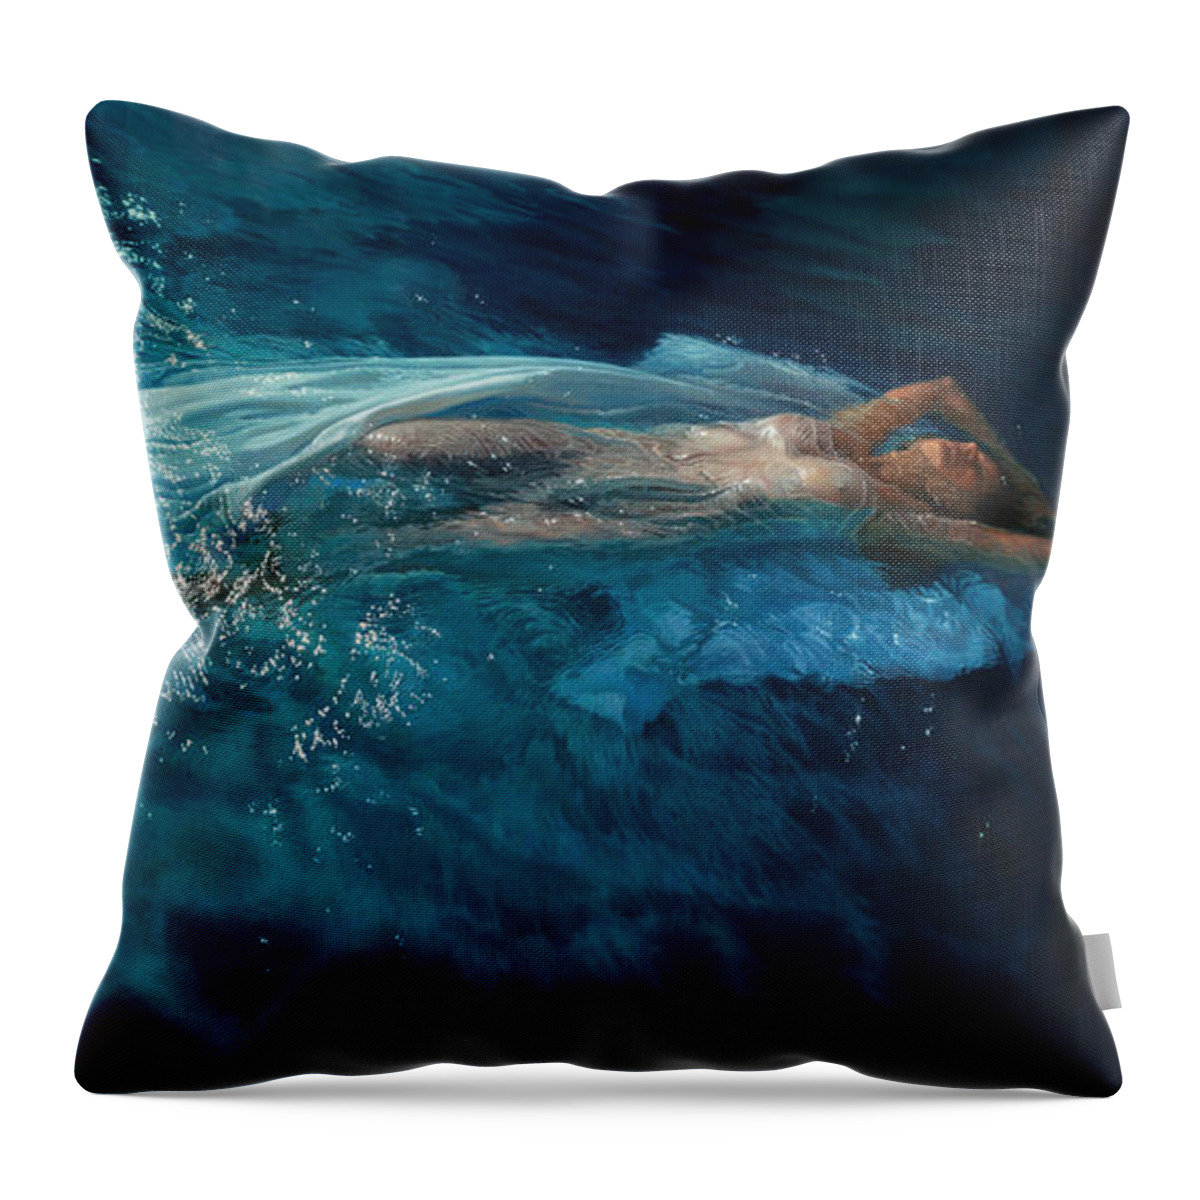 Featured Throw Pillow featuring the painting Susperia by Mia Tavonatti